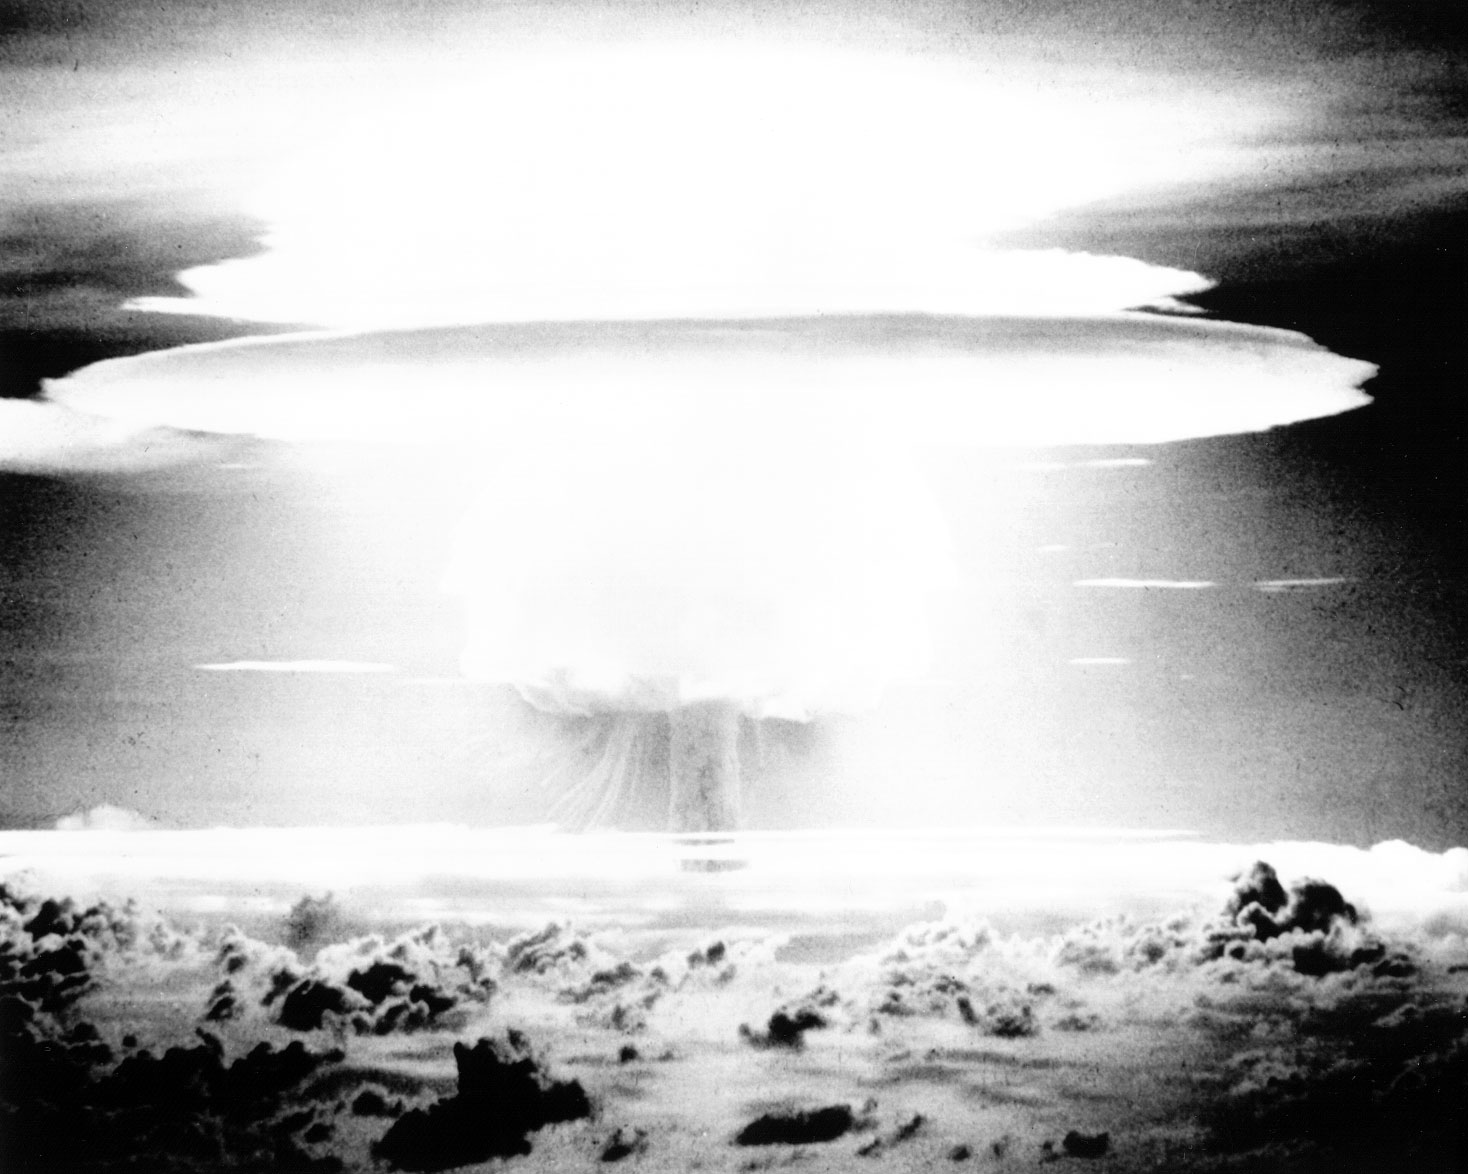 BRAVO
BRAVO - Operation Castle was an experimental thermonuclear device, 15 megaton weapons related surface shot. Detonated 2/28/54 on Bikini Atoll.
